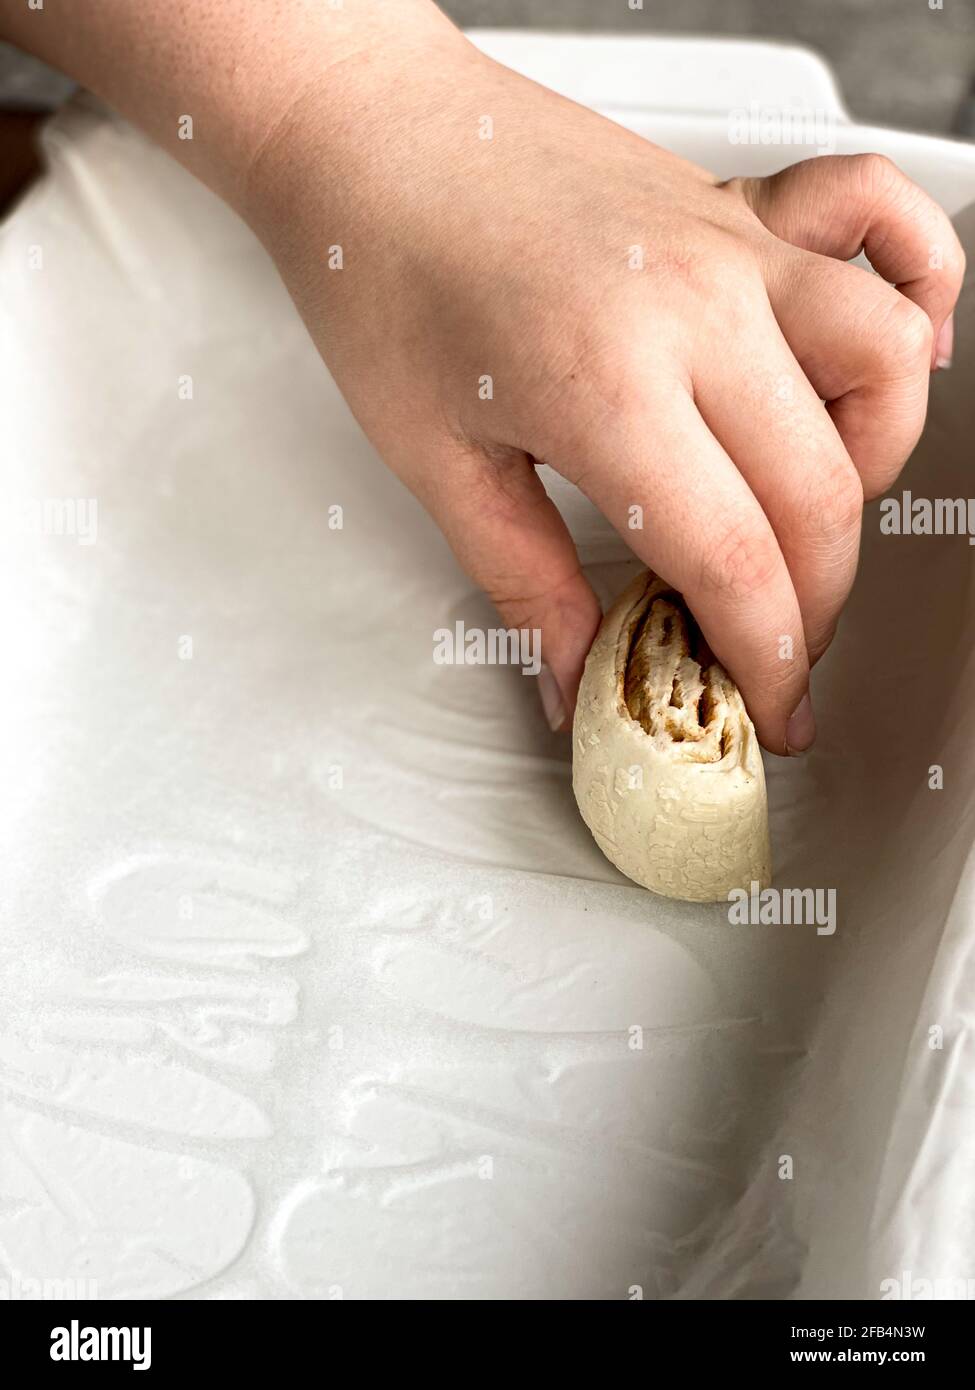 Hand taking hot nutty cookies out of steaming convection oven of kitchen  stove. Fresh baked shortbread pastry in silicone baking molds on metal  sheet Stock Photo - Alamy